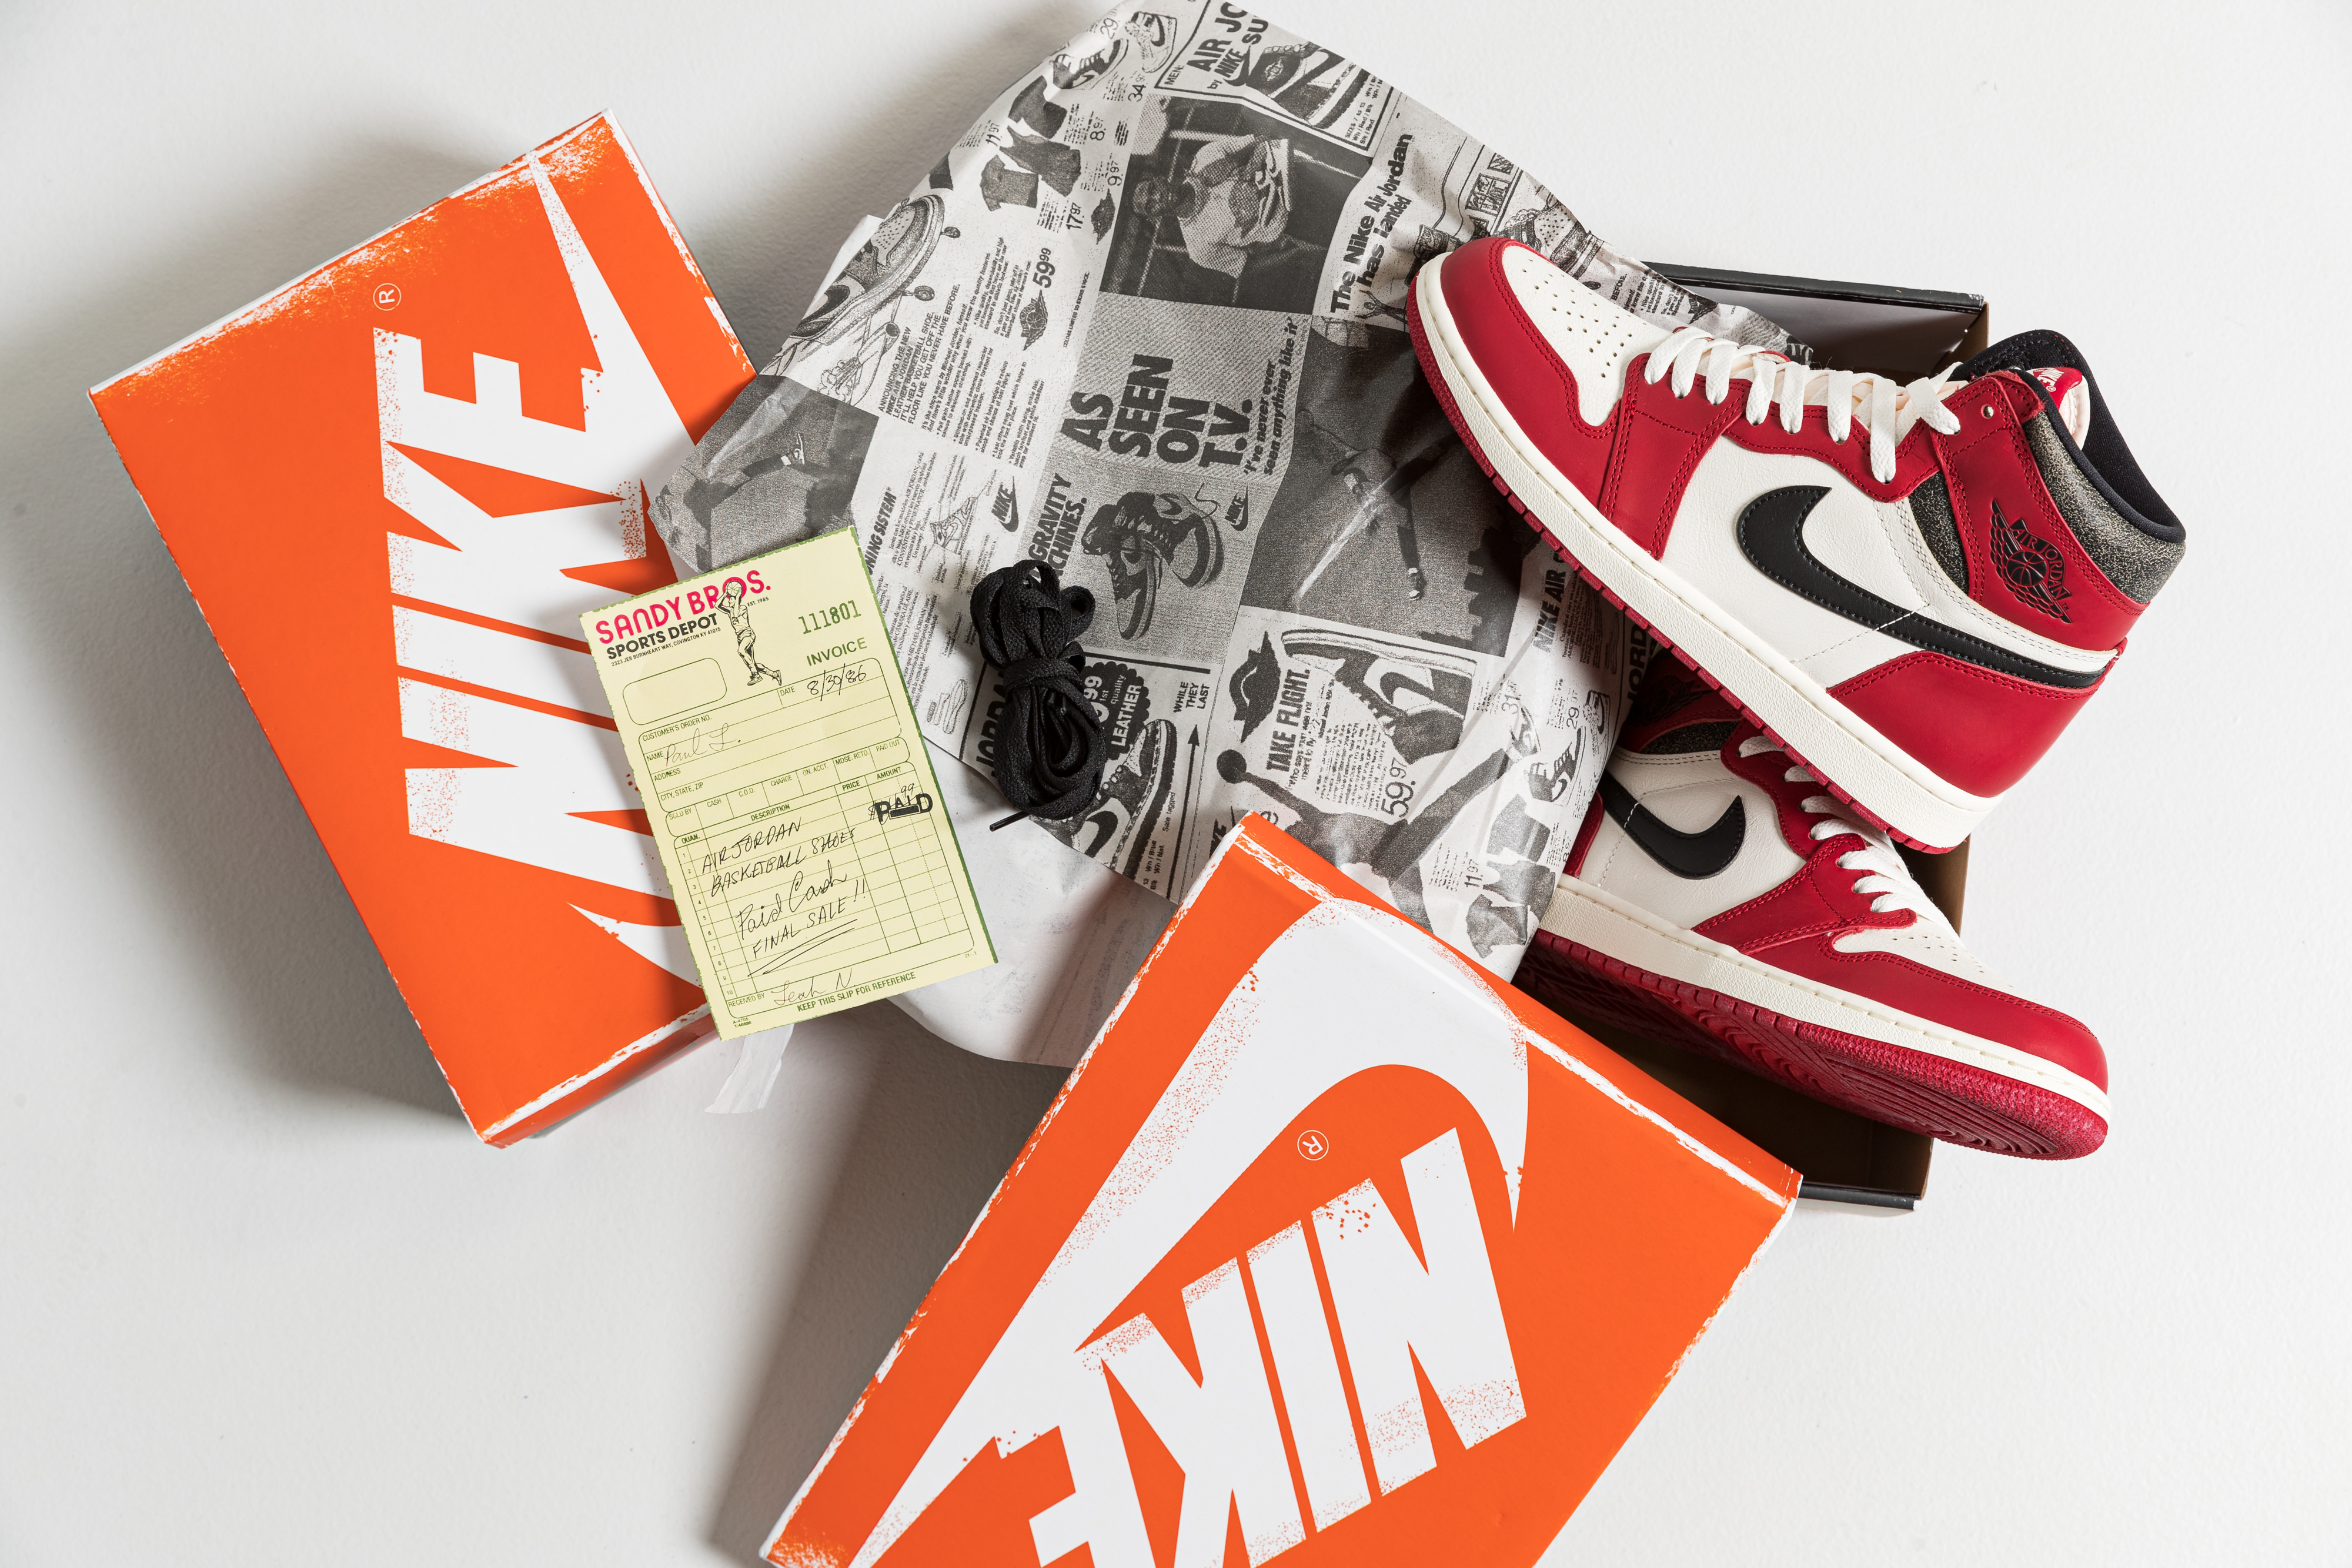 Up There Launches - Nike Air Jordan 1 Retro 'Lost & Found'